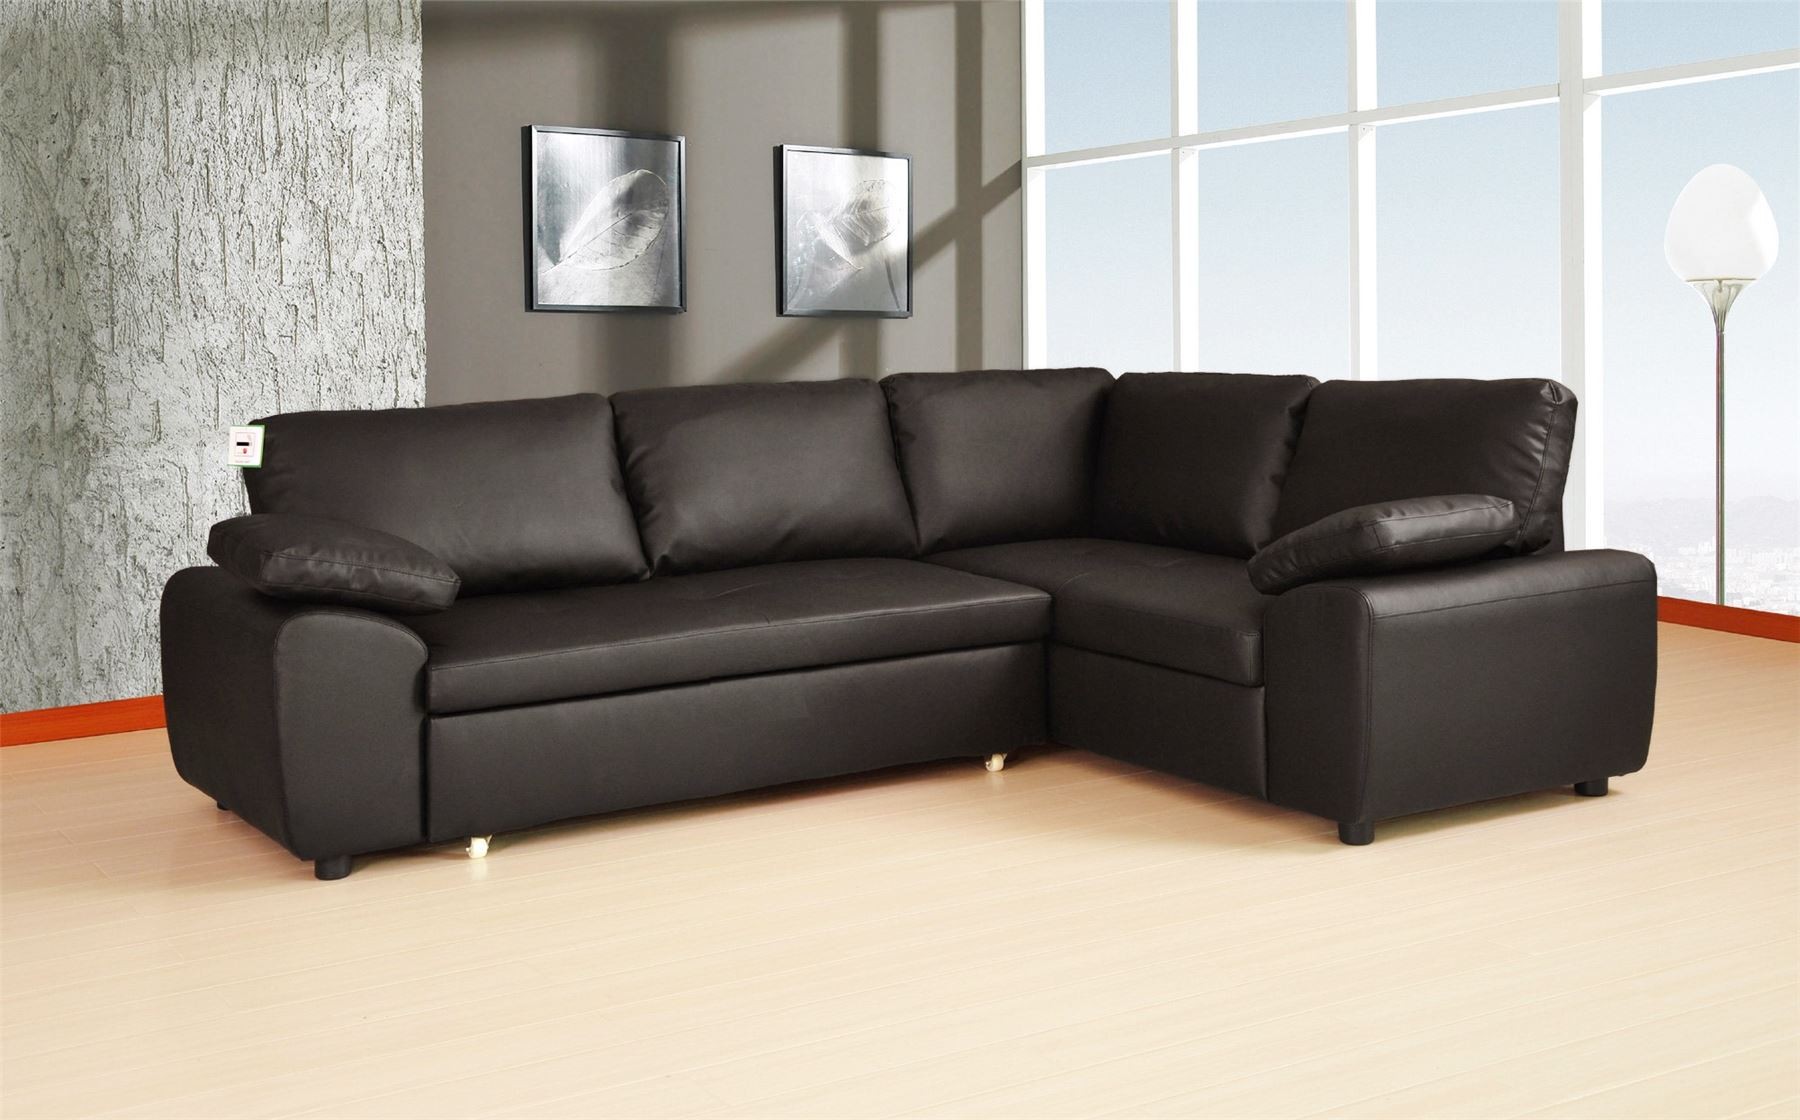 New enzo right hand bonded leather corner sofa u0026 sofabed with storage black leather corner sofa bed